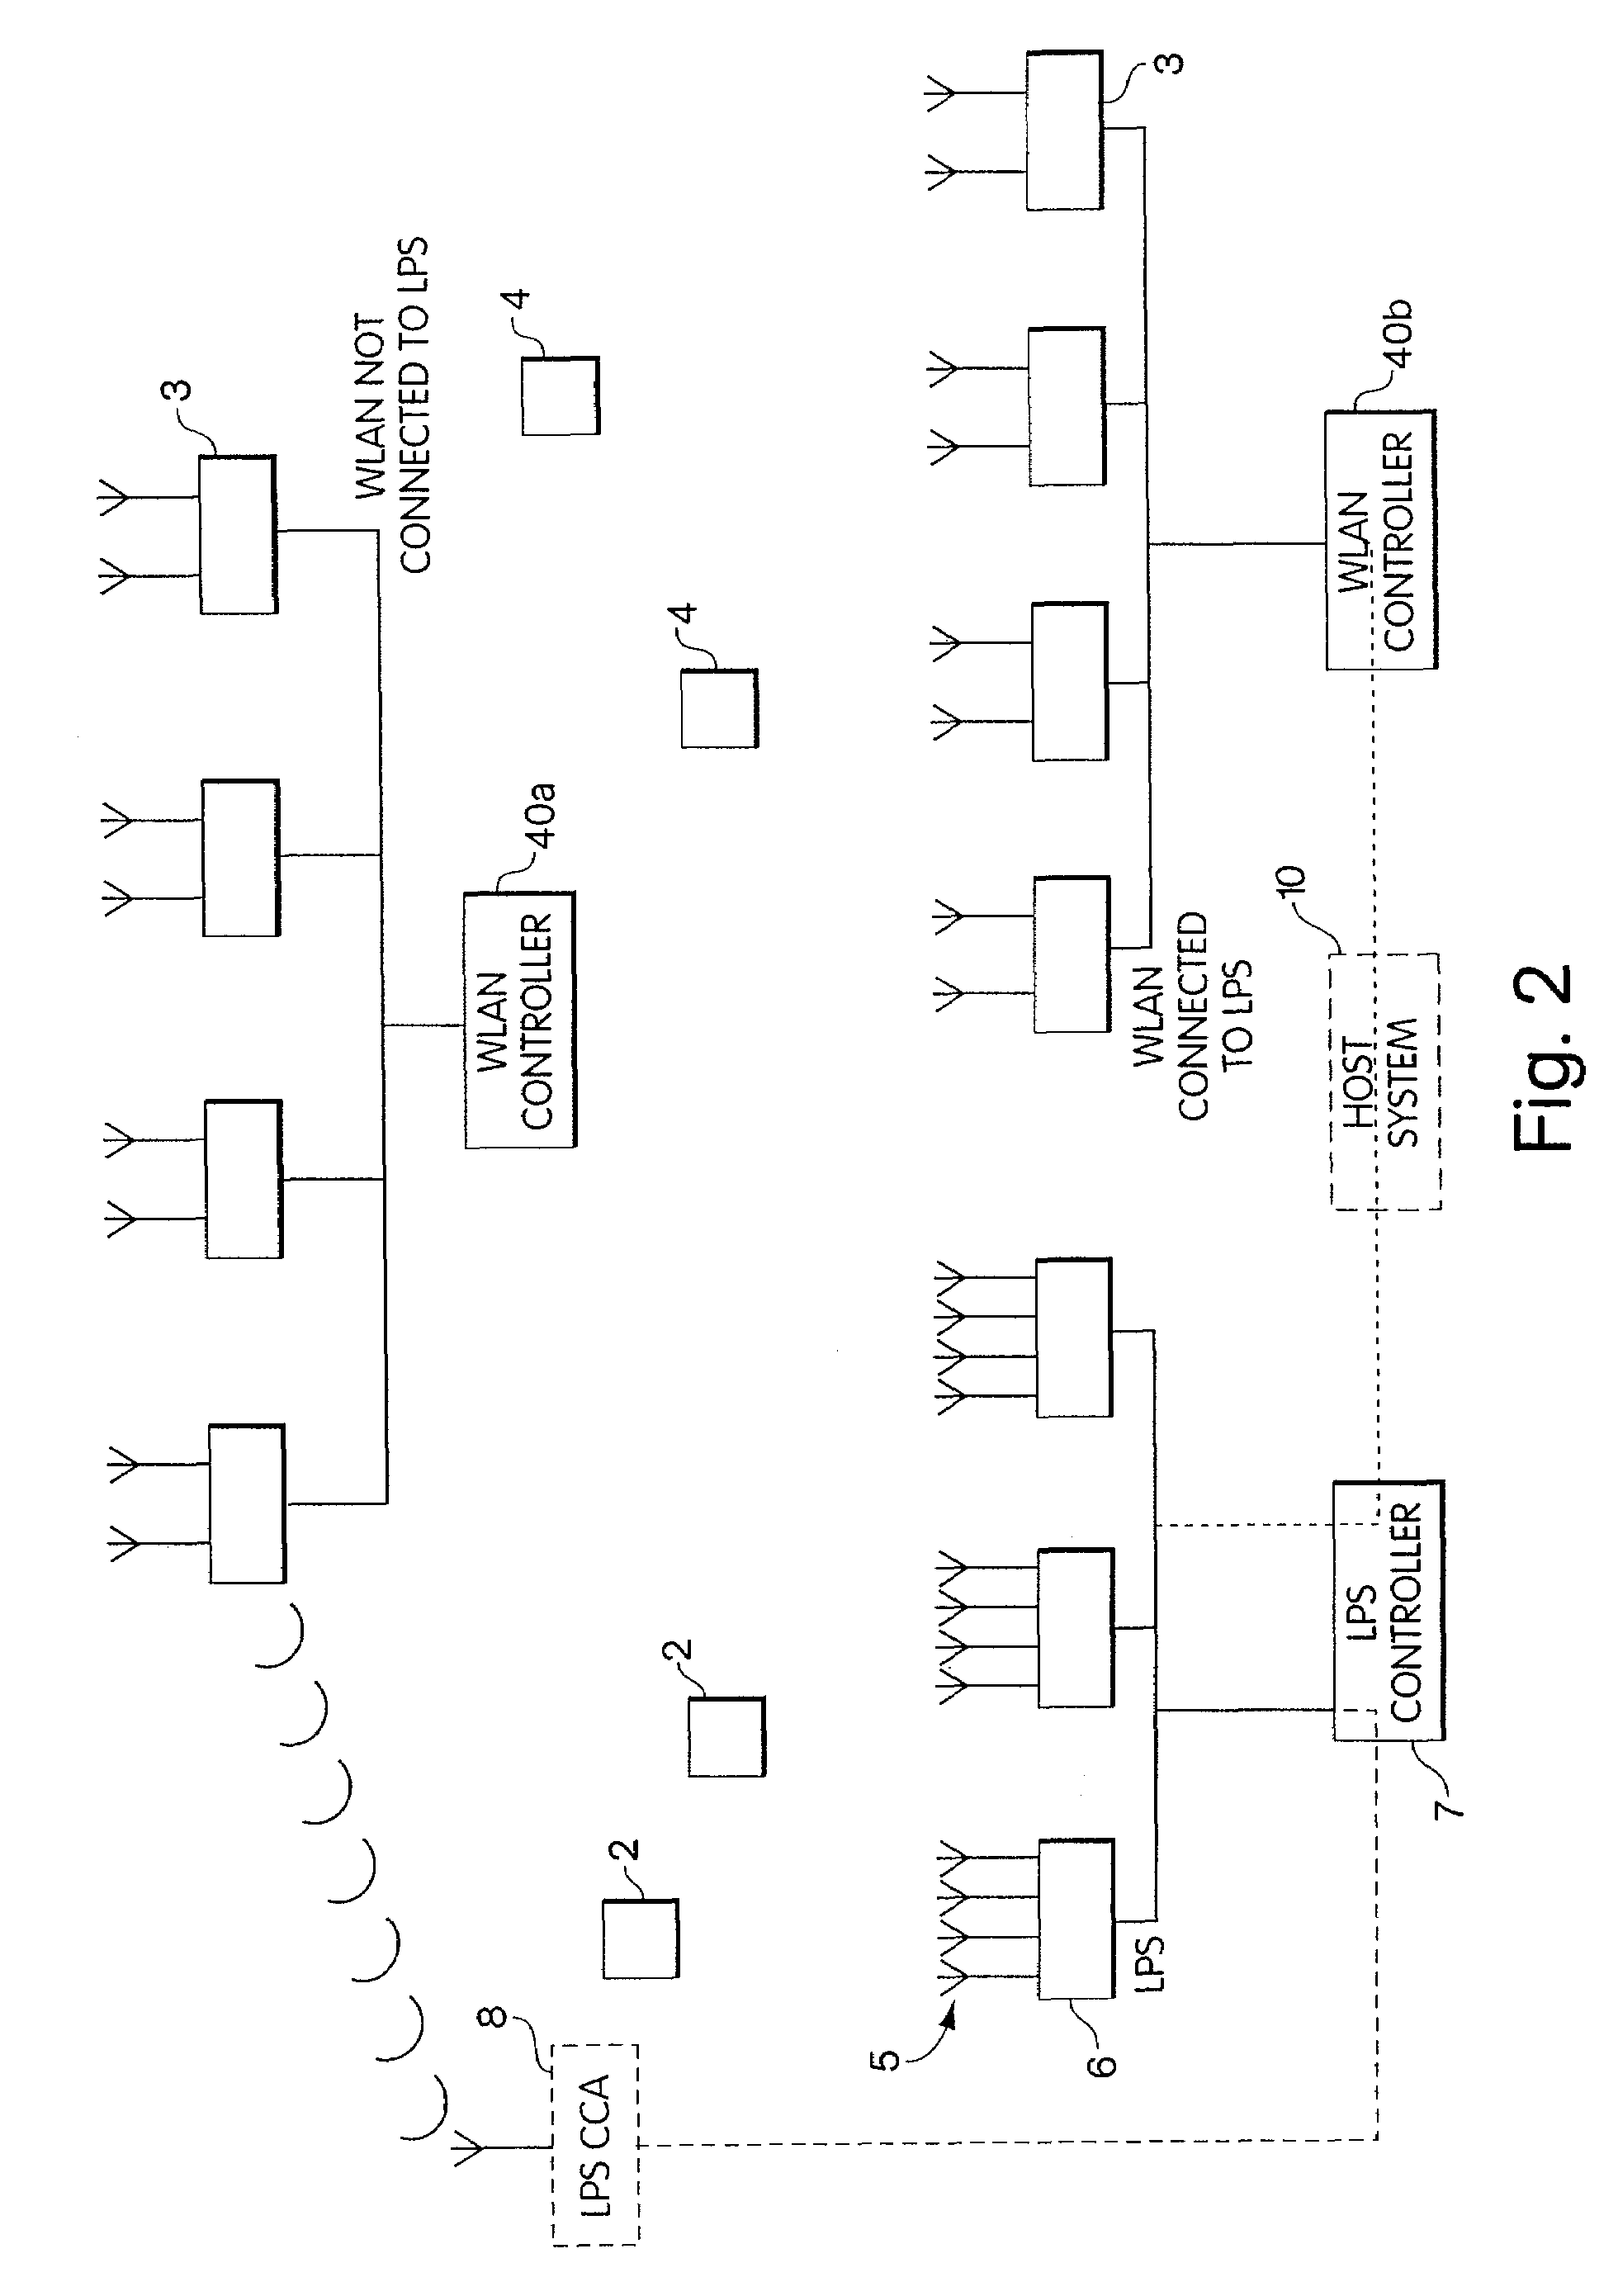 Method and apparatus for integrating wireless communication and asset location